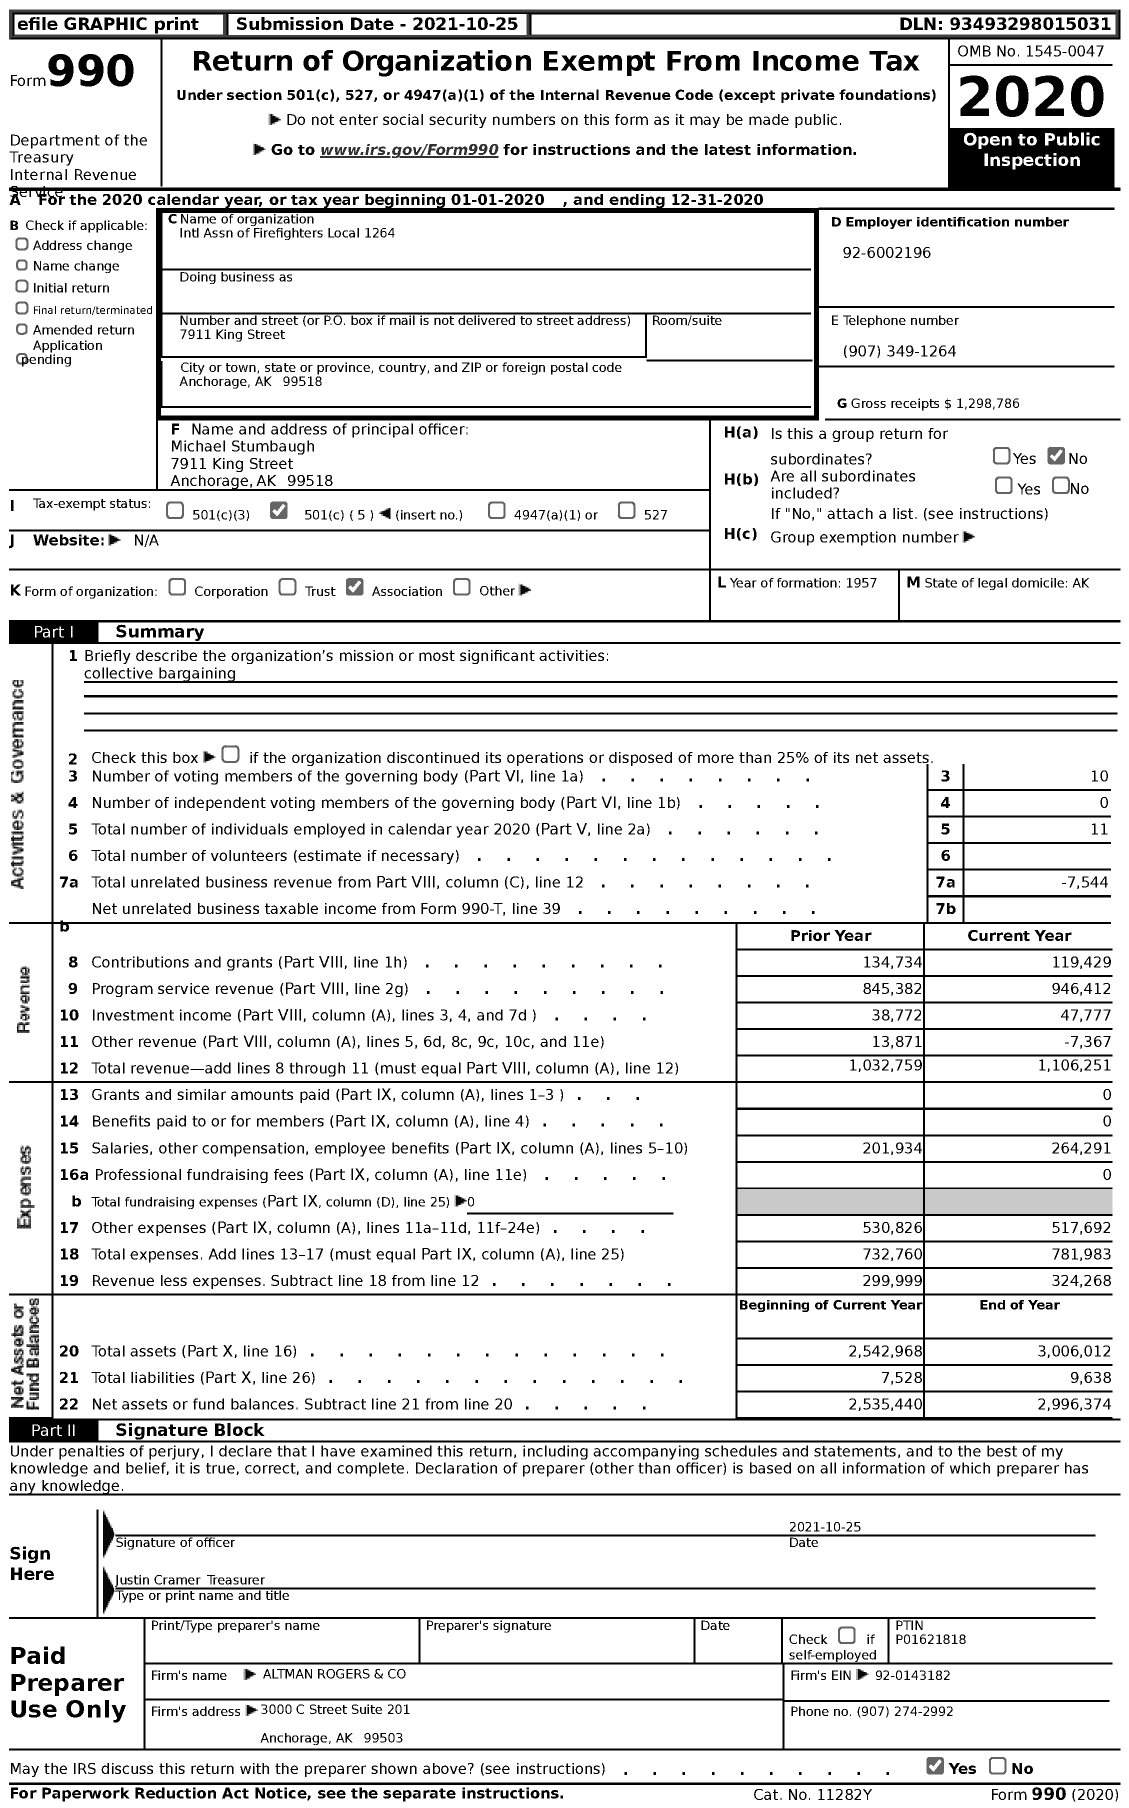 Image of first page of 2020 Form 990 for International Association of Fire Fighters - L1264 Anchorage